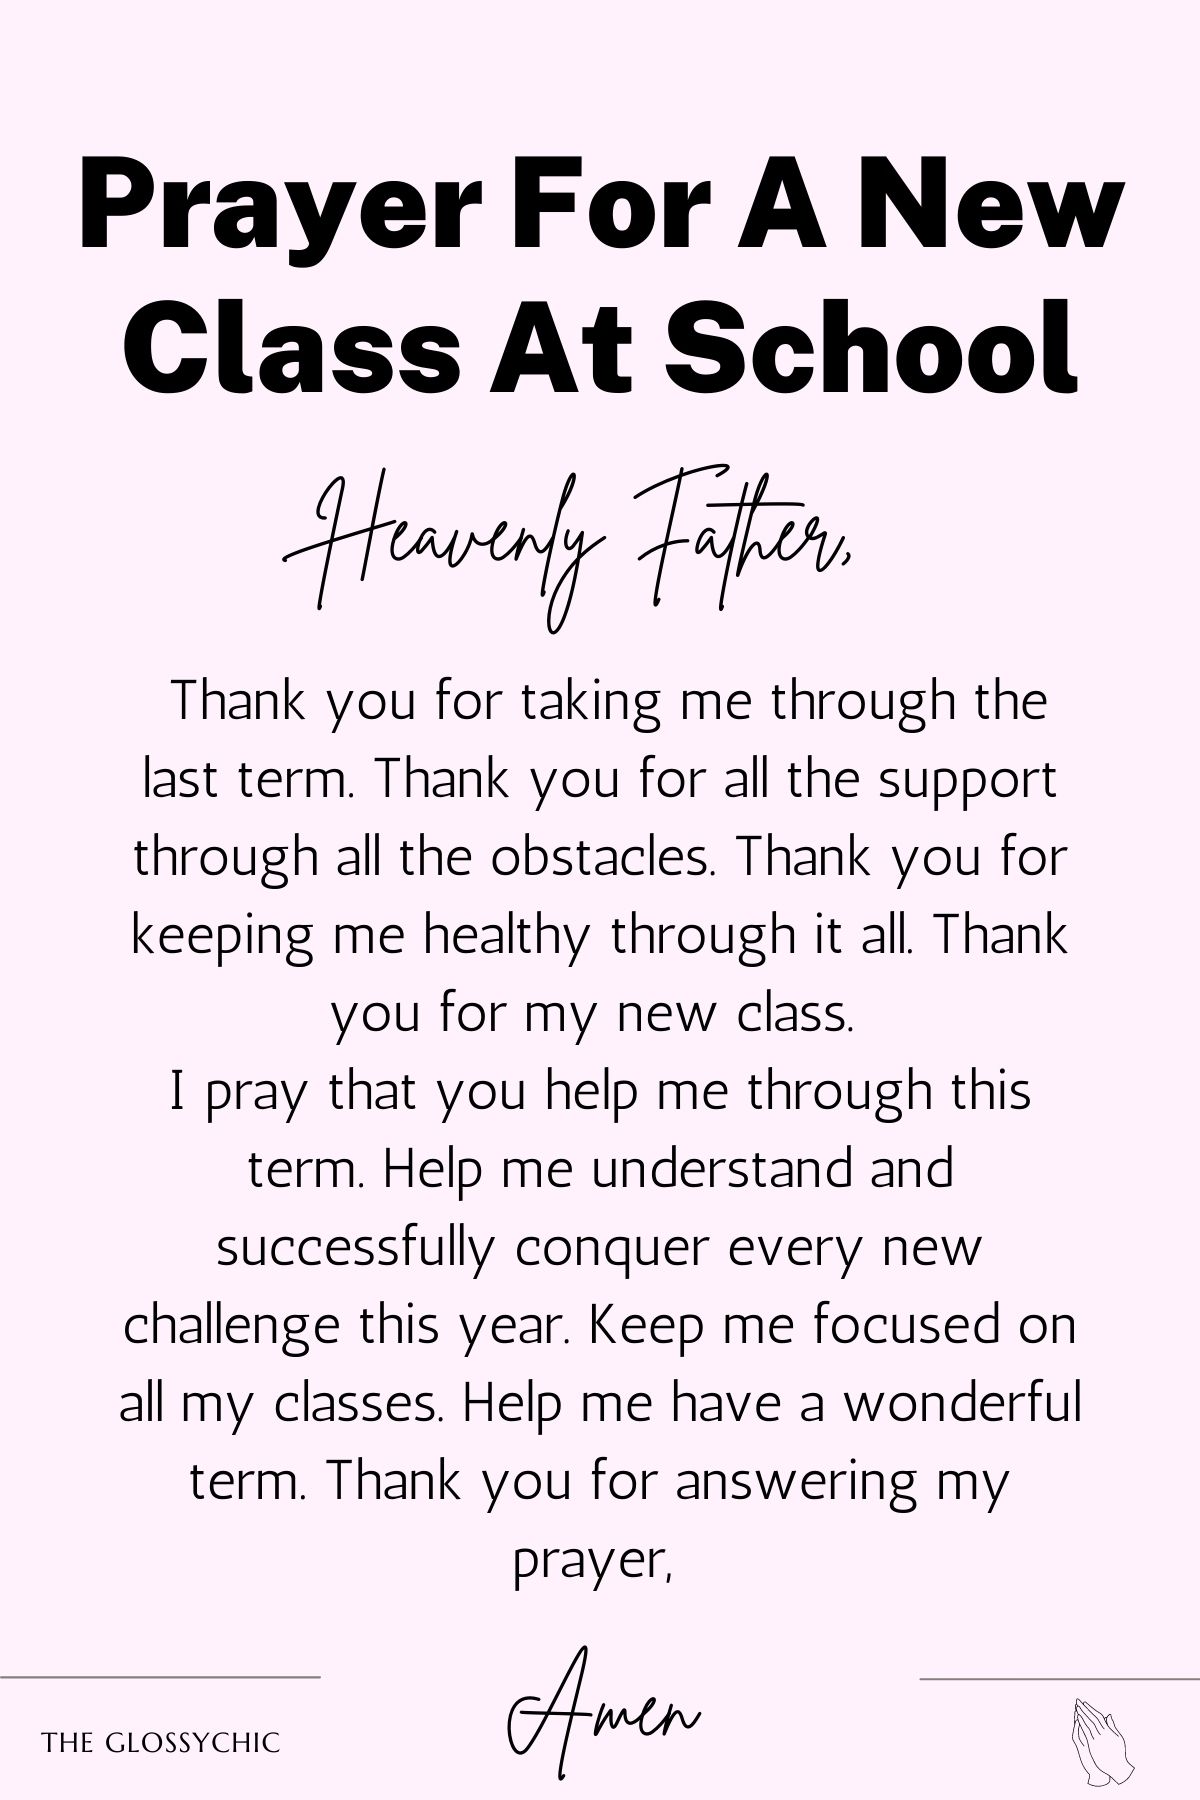 Prayer for a new class At School